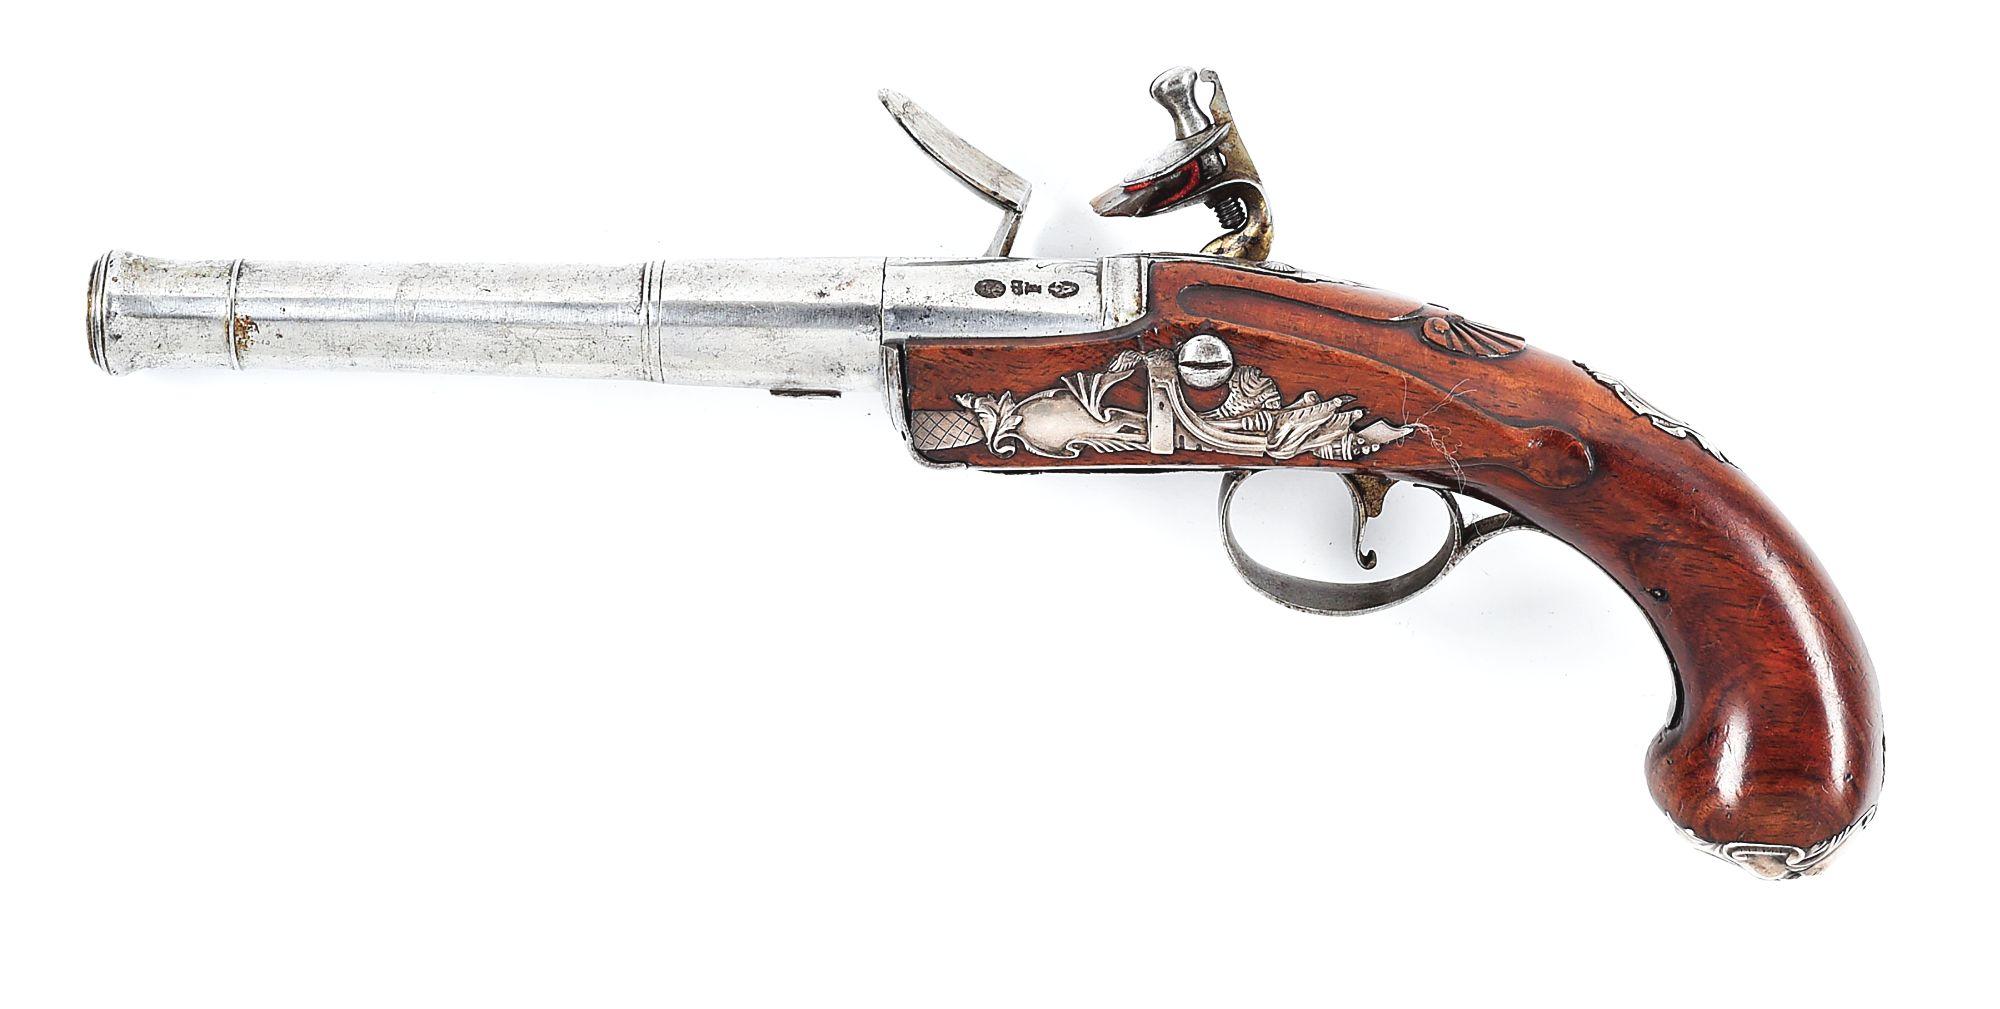 (A) FINE ENGLISH SILVER MOUNTED QUEEN ANNE FLINTLOCK OFFICER'S PISTOL BY ISAAC SMITH.